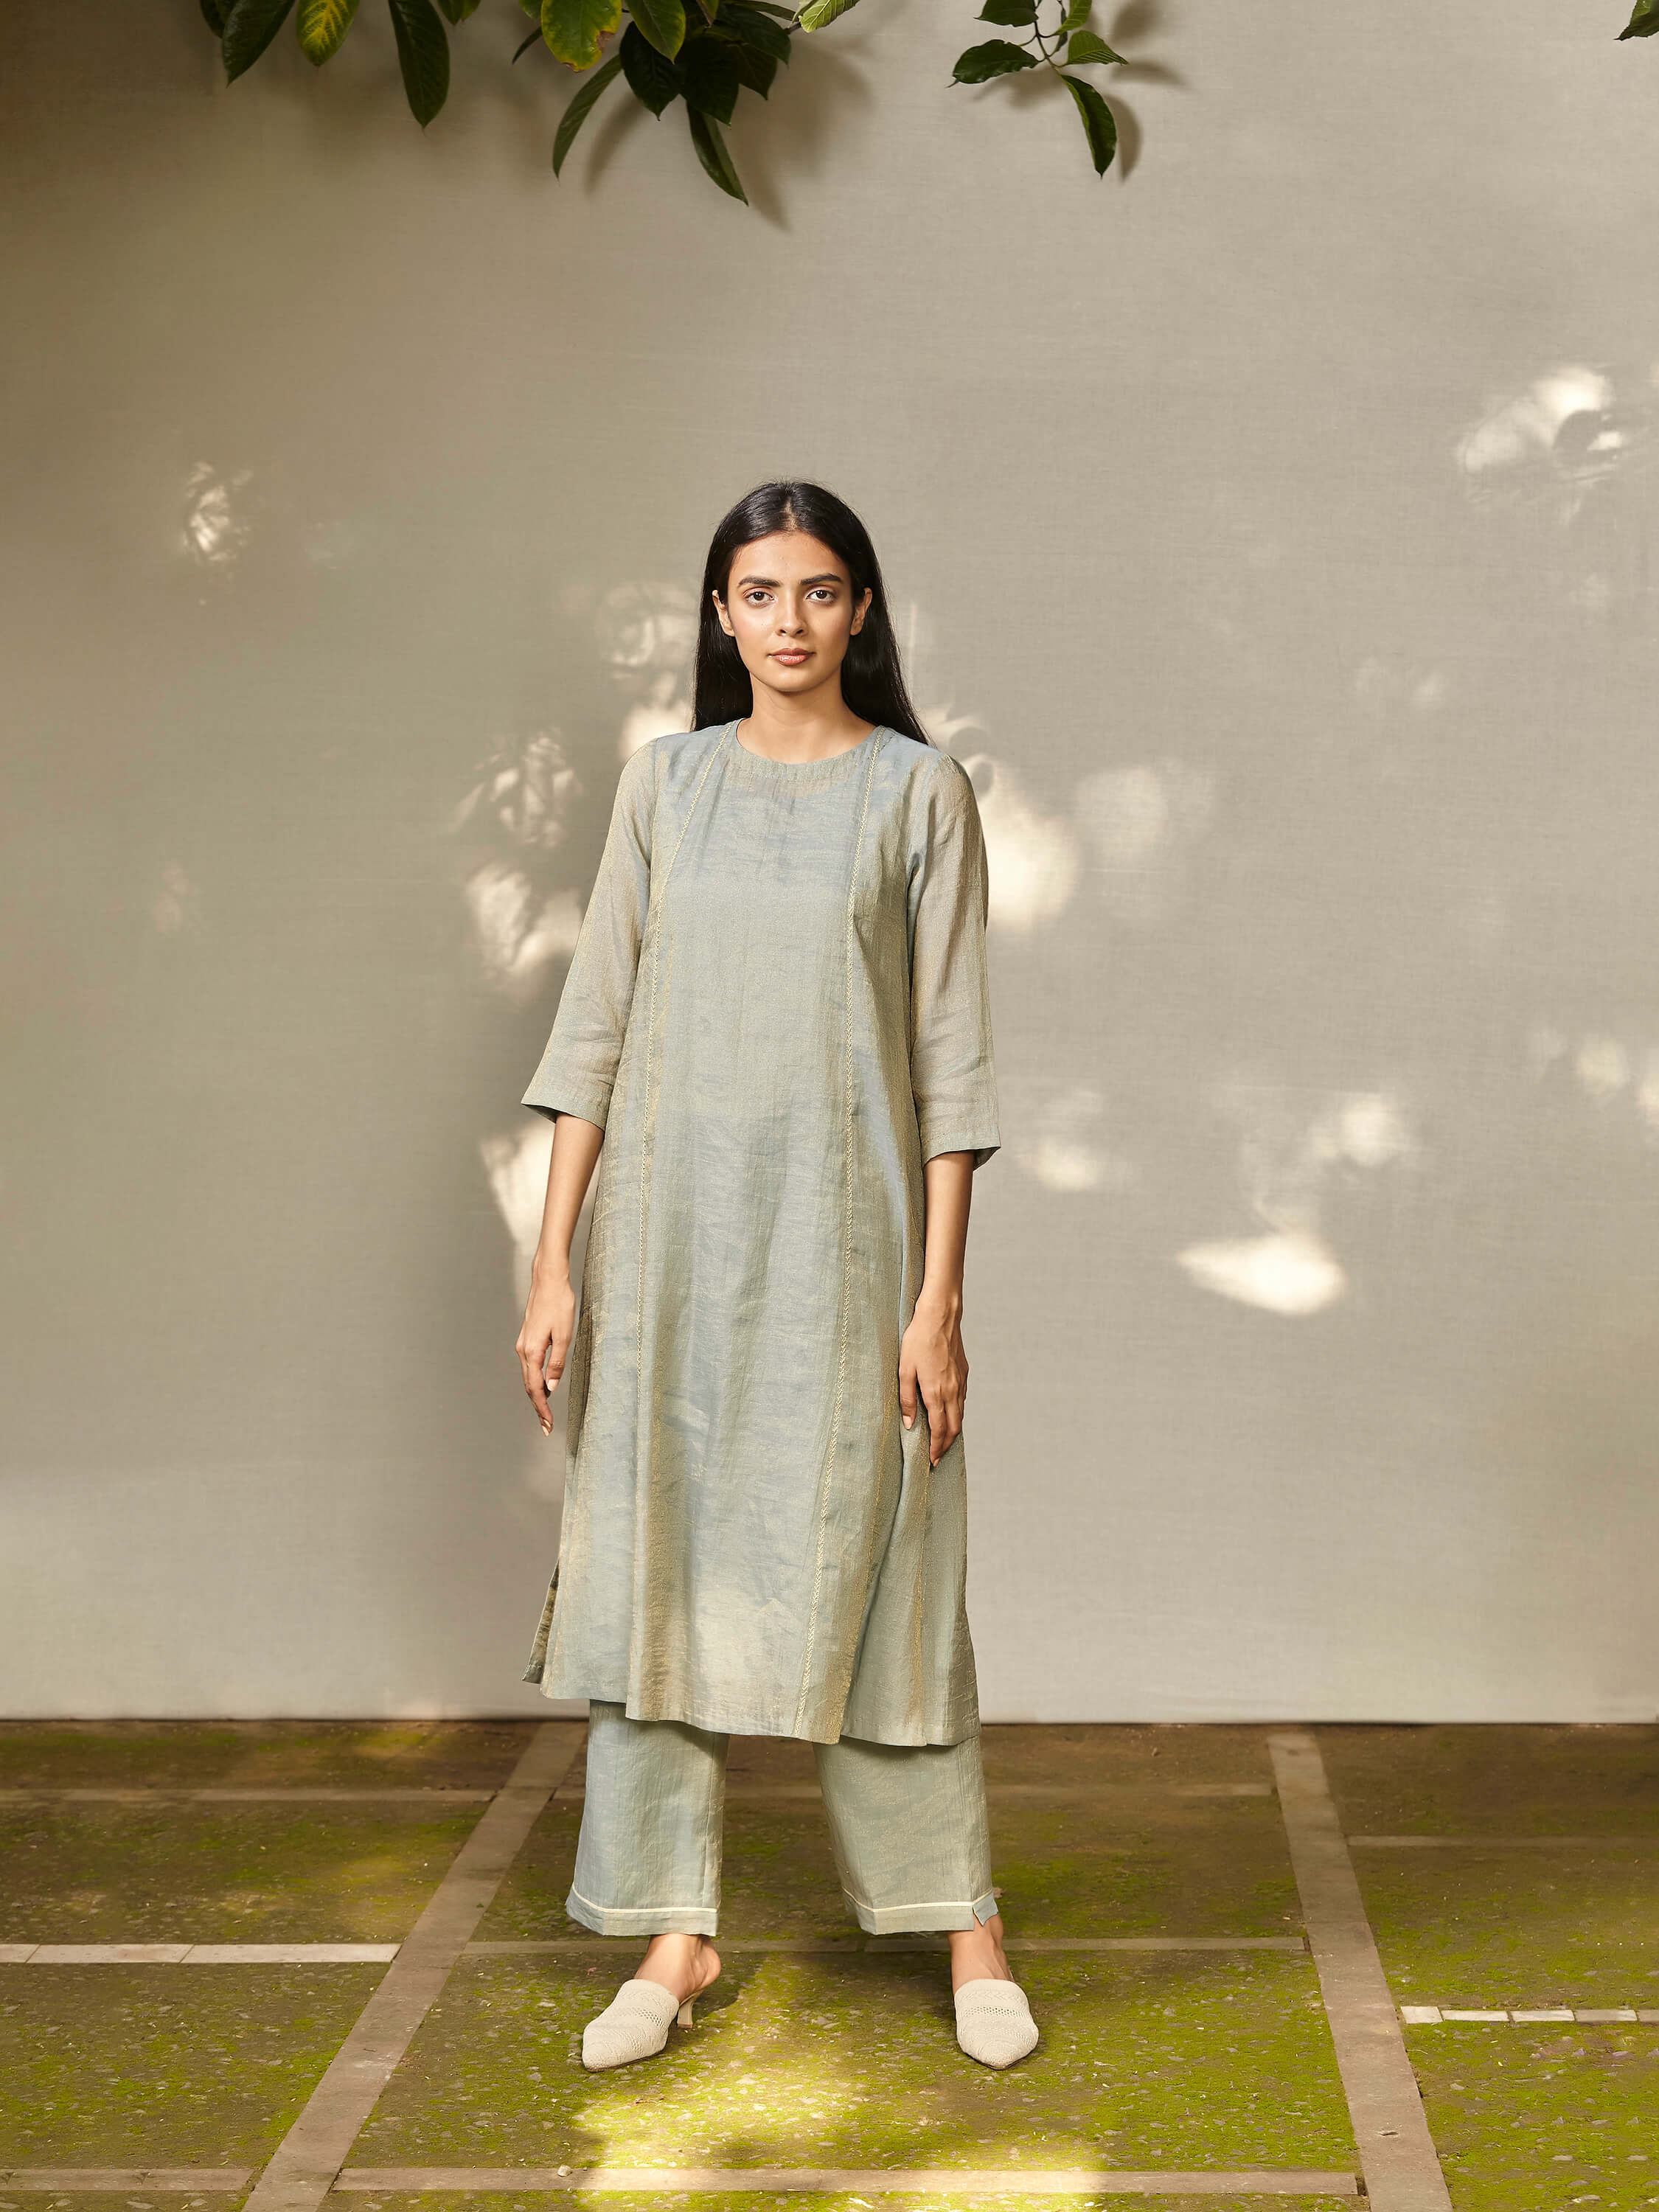 Woman in light blue ethnic long kurta and pants standing outdoors